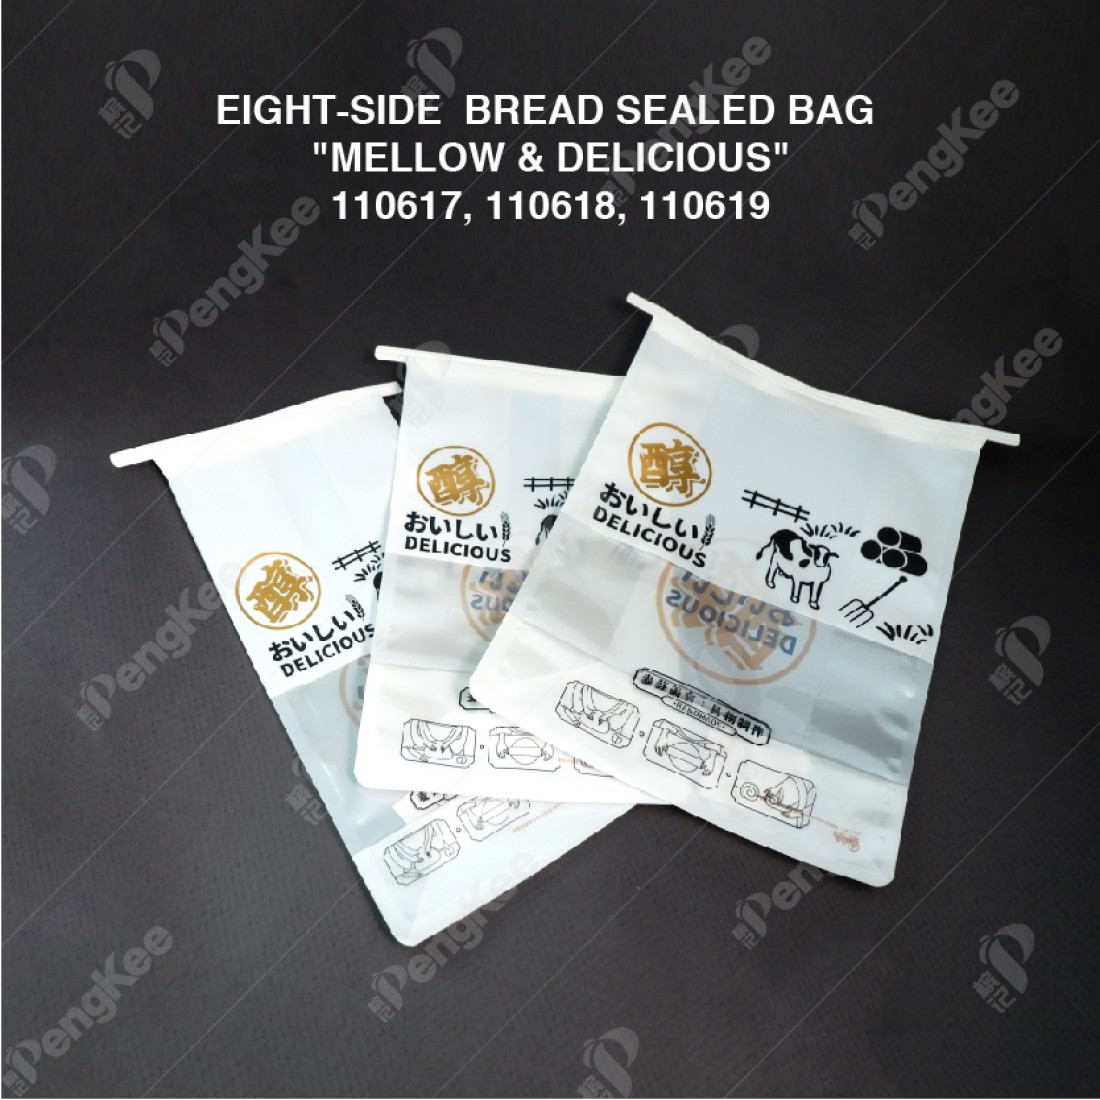 EIGHT-SIDE  BREAD SEALED BAG "MELLOW & DELICIOUS"